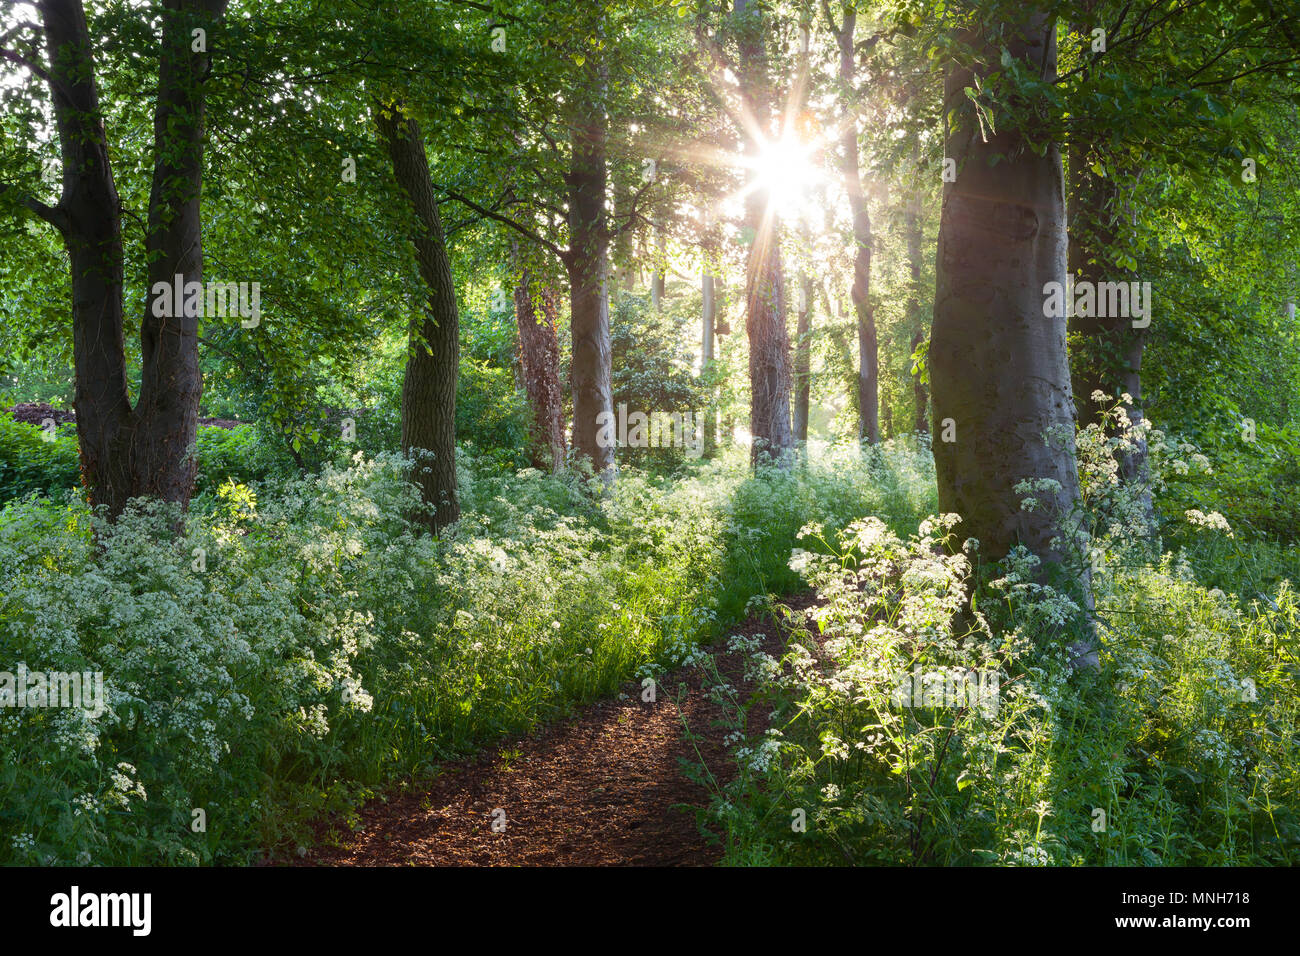 Humber, North Lincolnshire, UK. 17th May 2018. UK Weather: Early morning light on Cow Parsley and Beech Trees in Baysgarth Park in Spring. Barton-upon-Humber, North Lincolnshire, UK. 17th May 2018. Credit: LEE BEEL/Alamy Live News Stock Photo